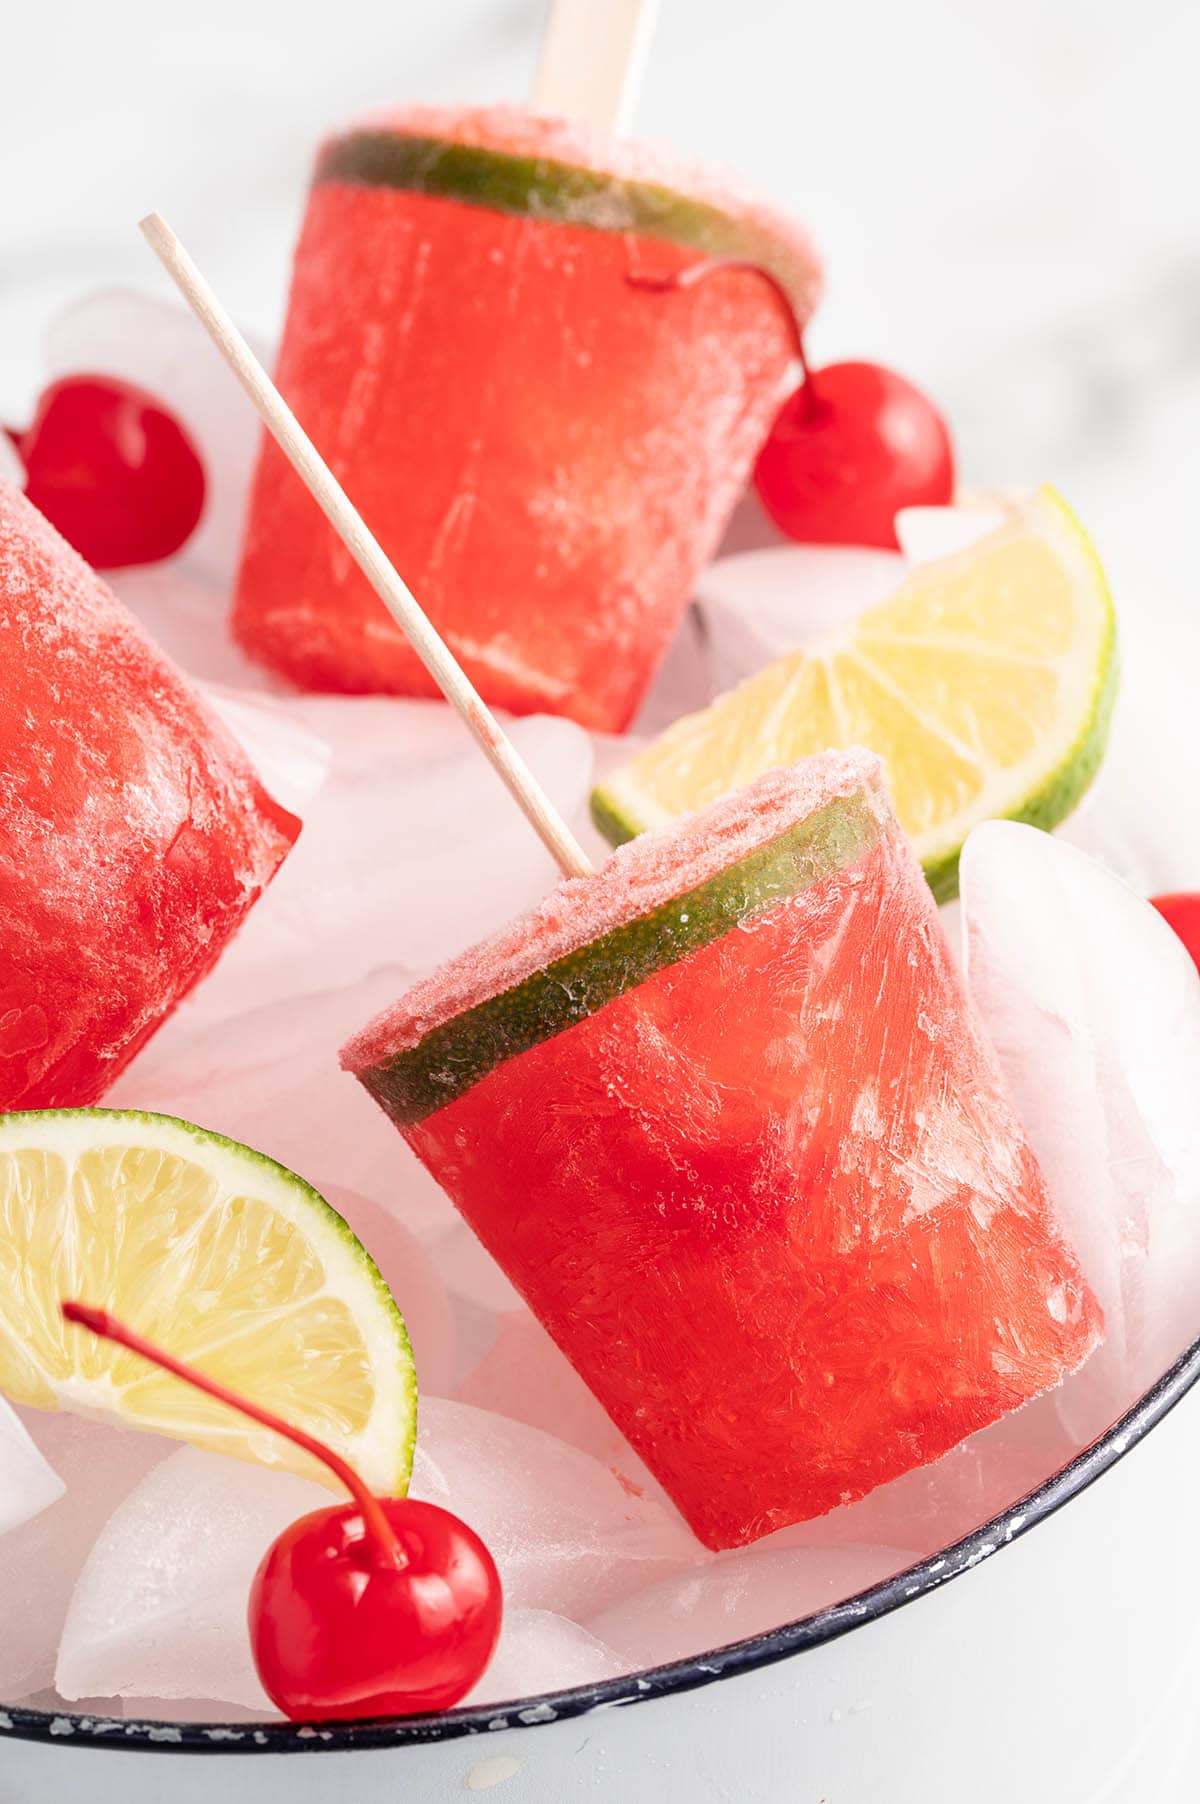 Dirty Shirley Popsicle with cherries and lime inside a plate full of ice cubes.